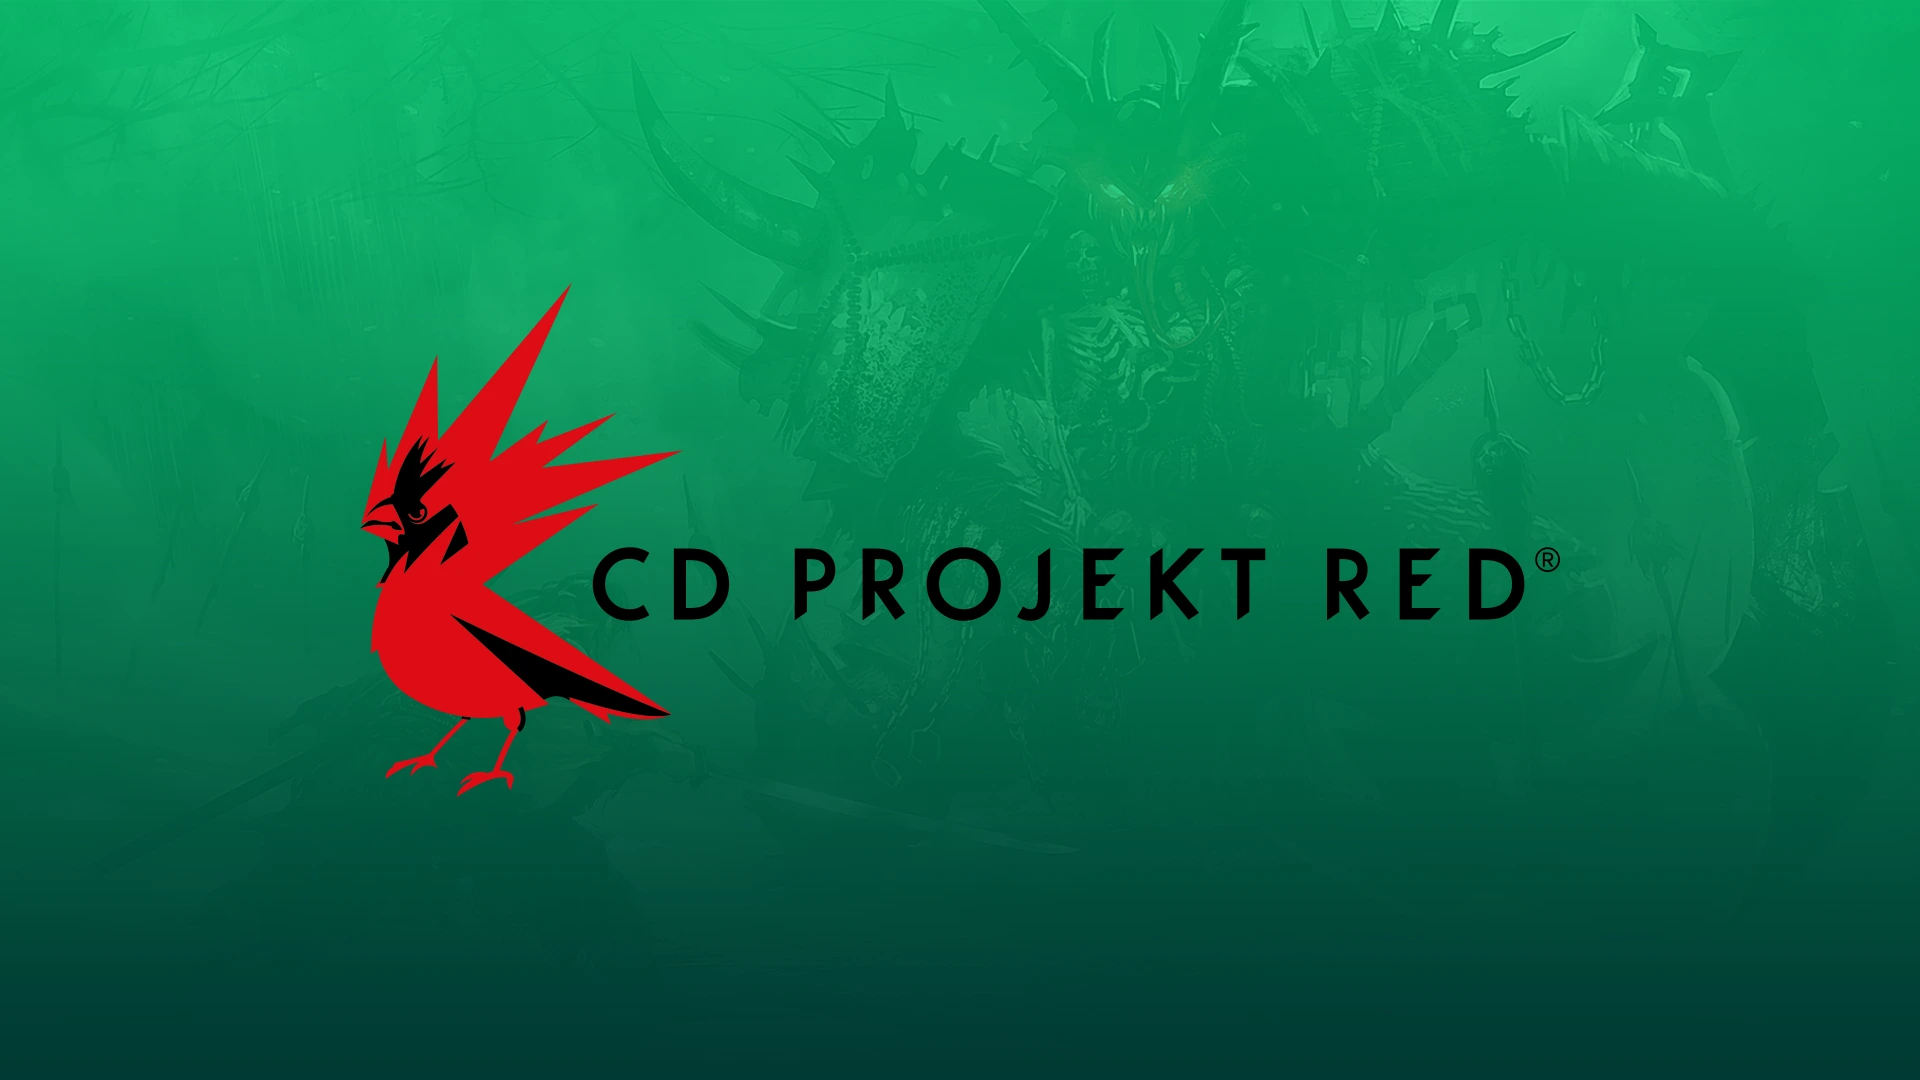 Former CD Project Red developers are working on a new online game set in feudal Japan